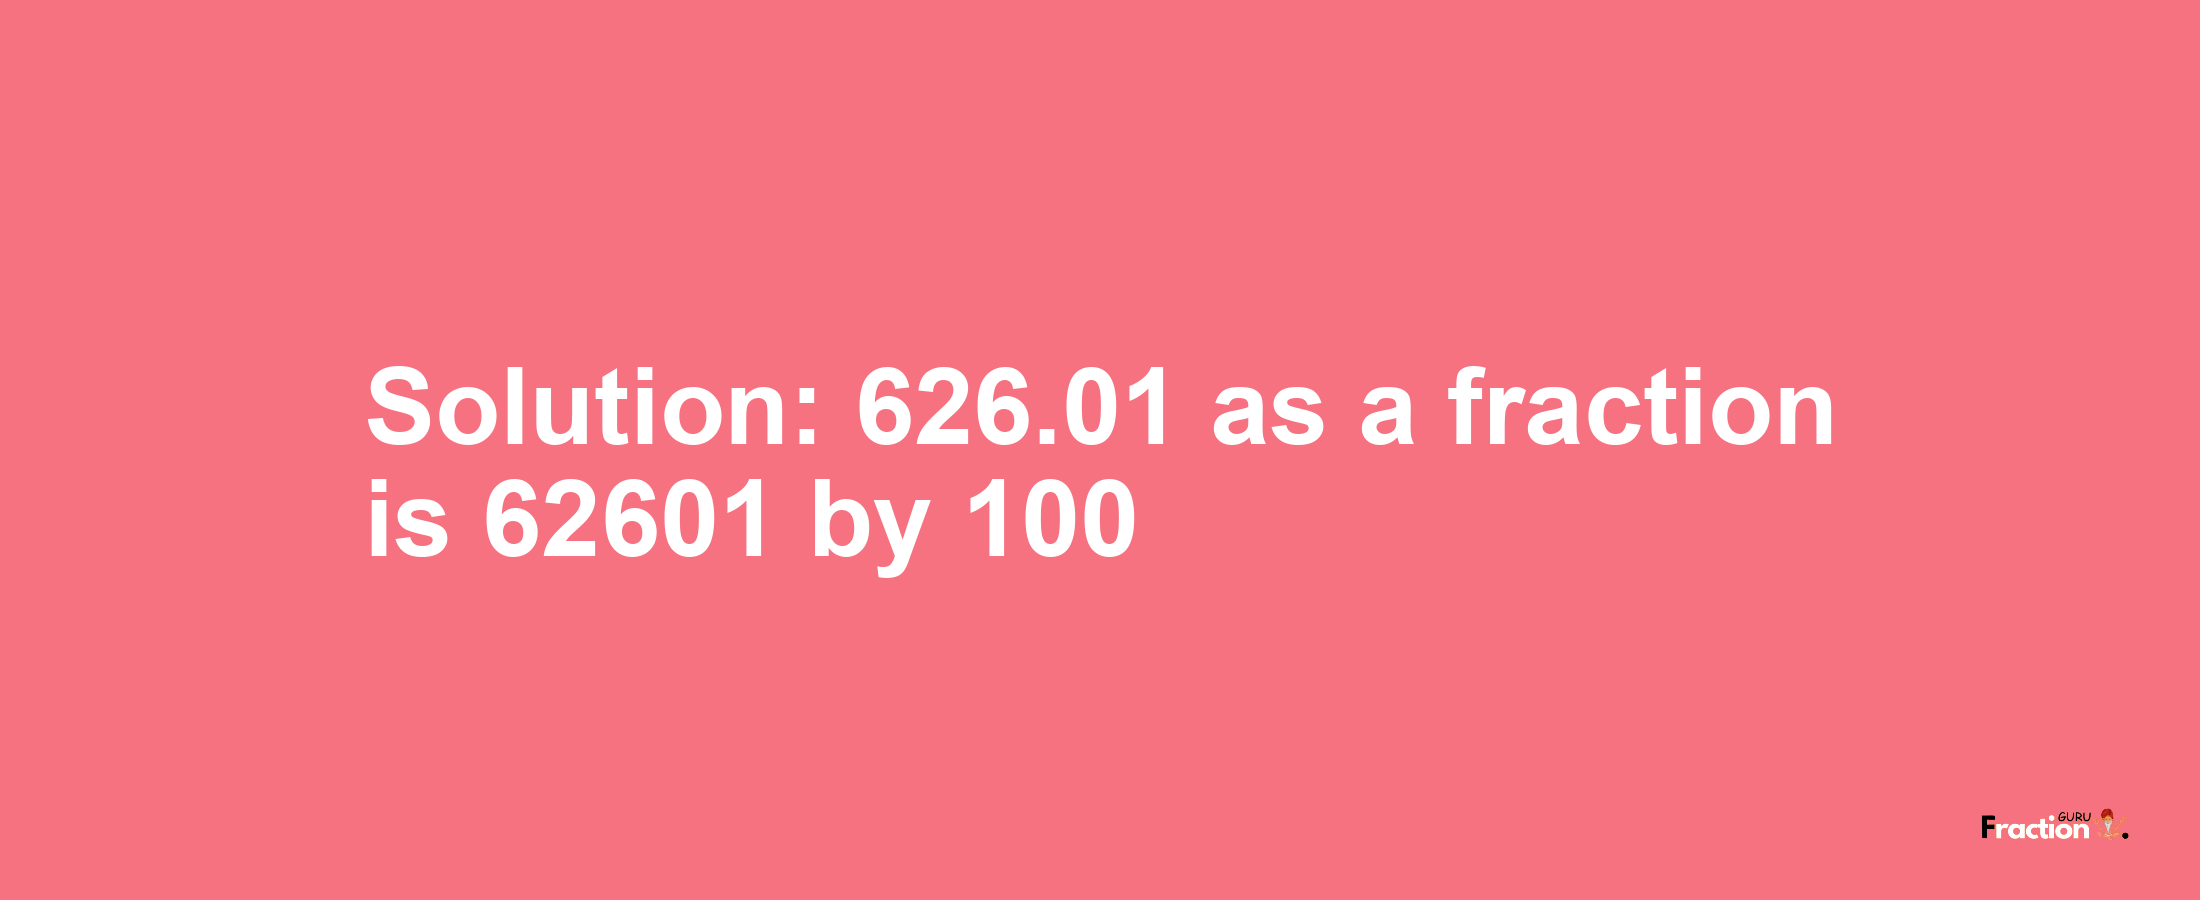 Solution:626.01 as a fraction is 62601/100